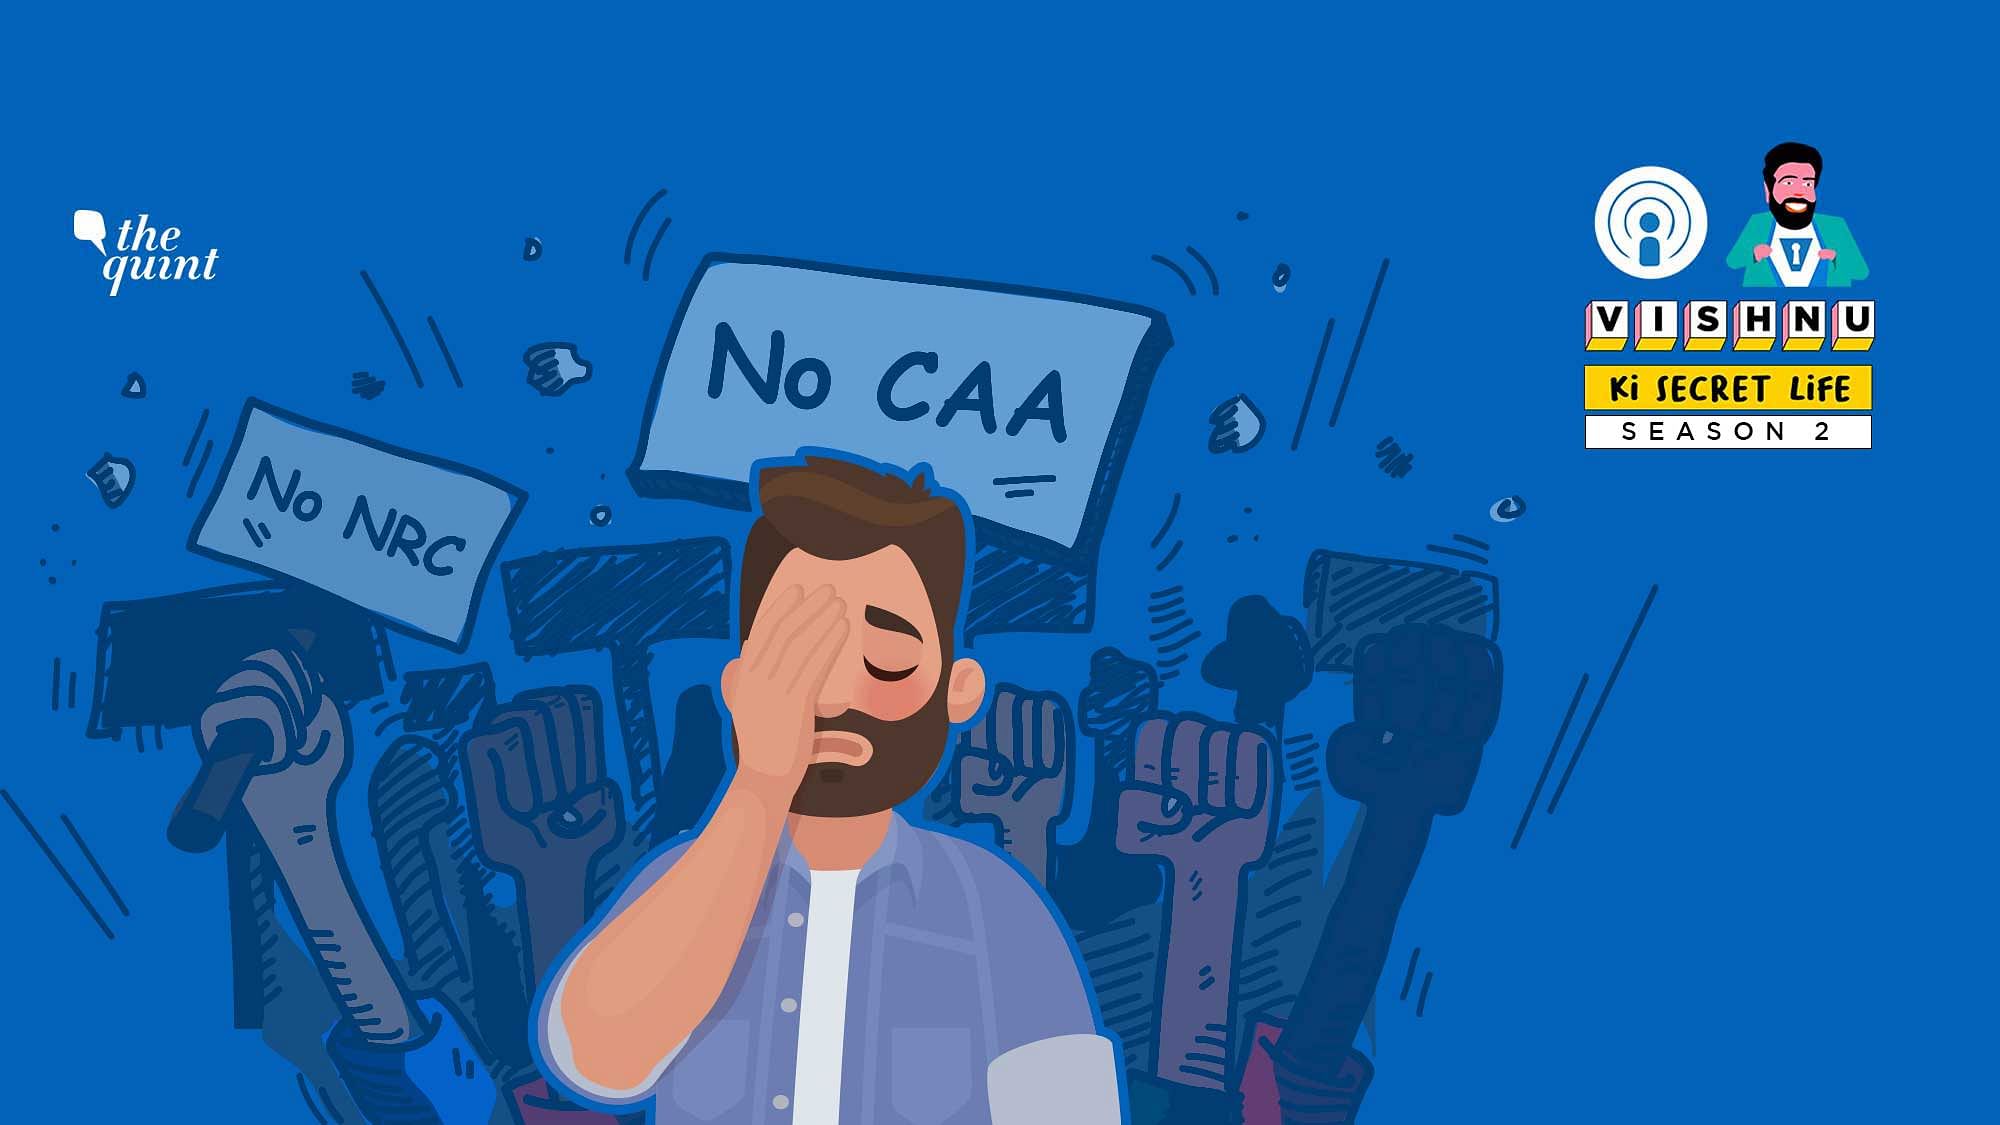 Why has India’s collective mental health taken a dip during the anti-CAA protests? How can you preserve your peace of mind during protests and unrest? We spoke to psychologists and protesters to understand.